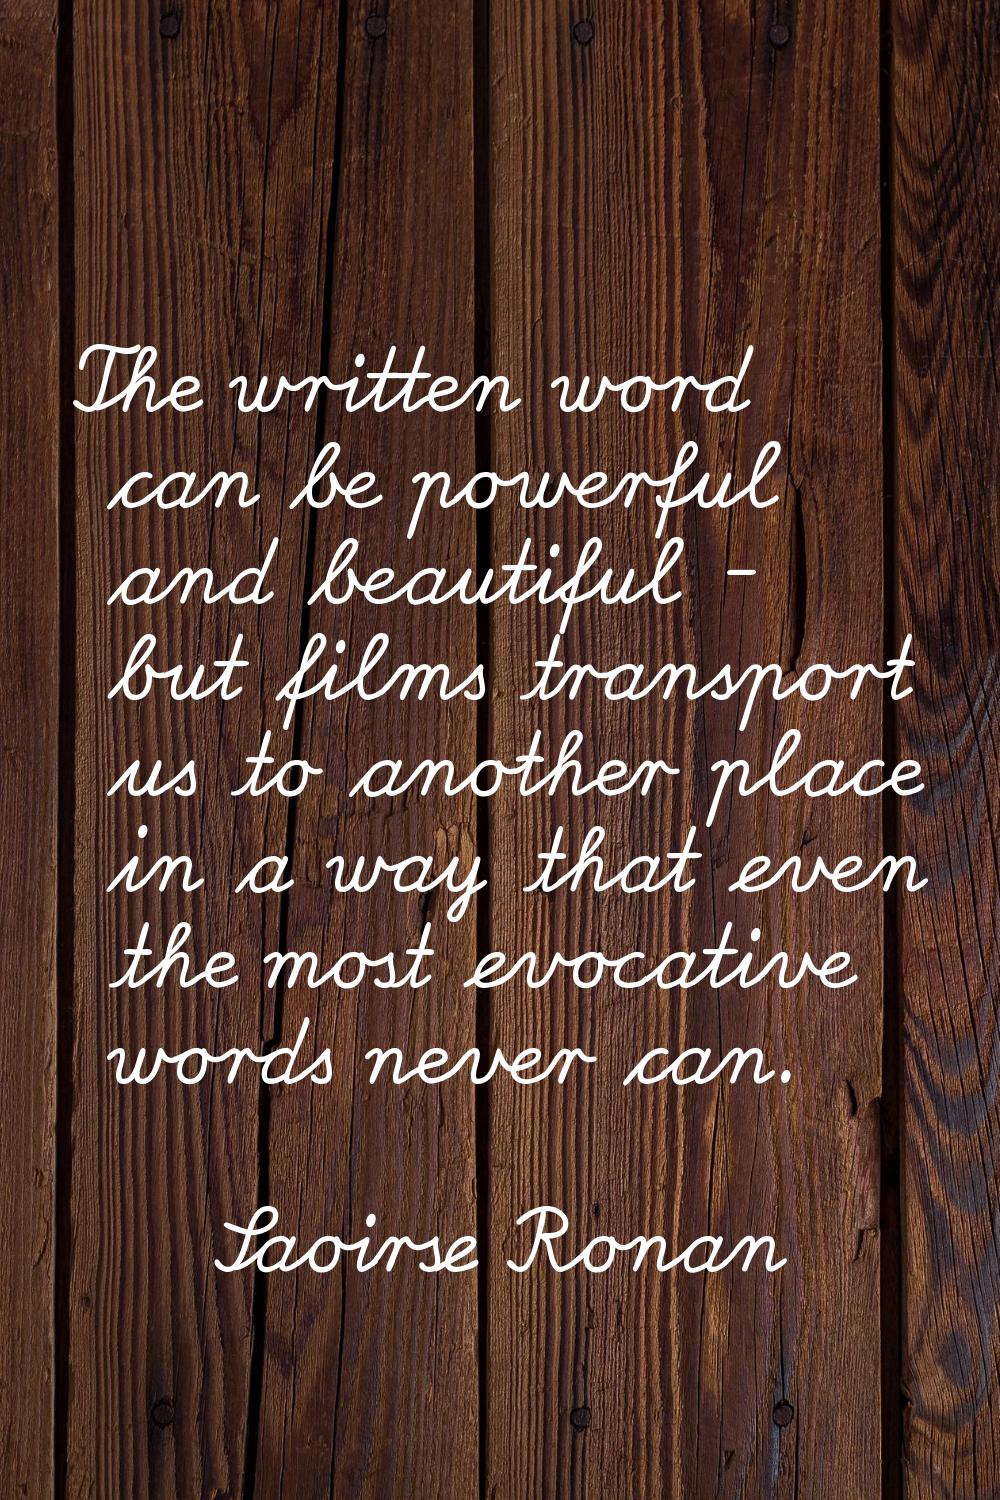 The written word can be powerful and beautiful - but films transport us to another place in a way t